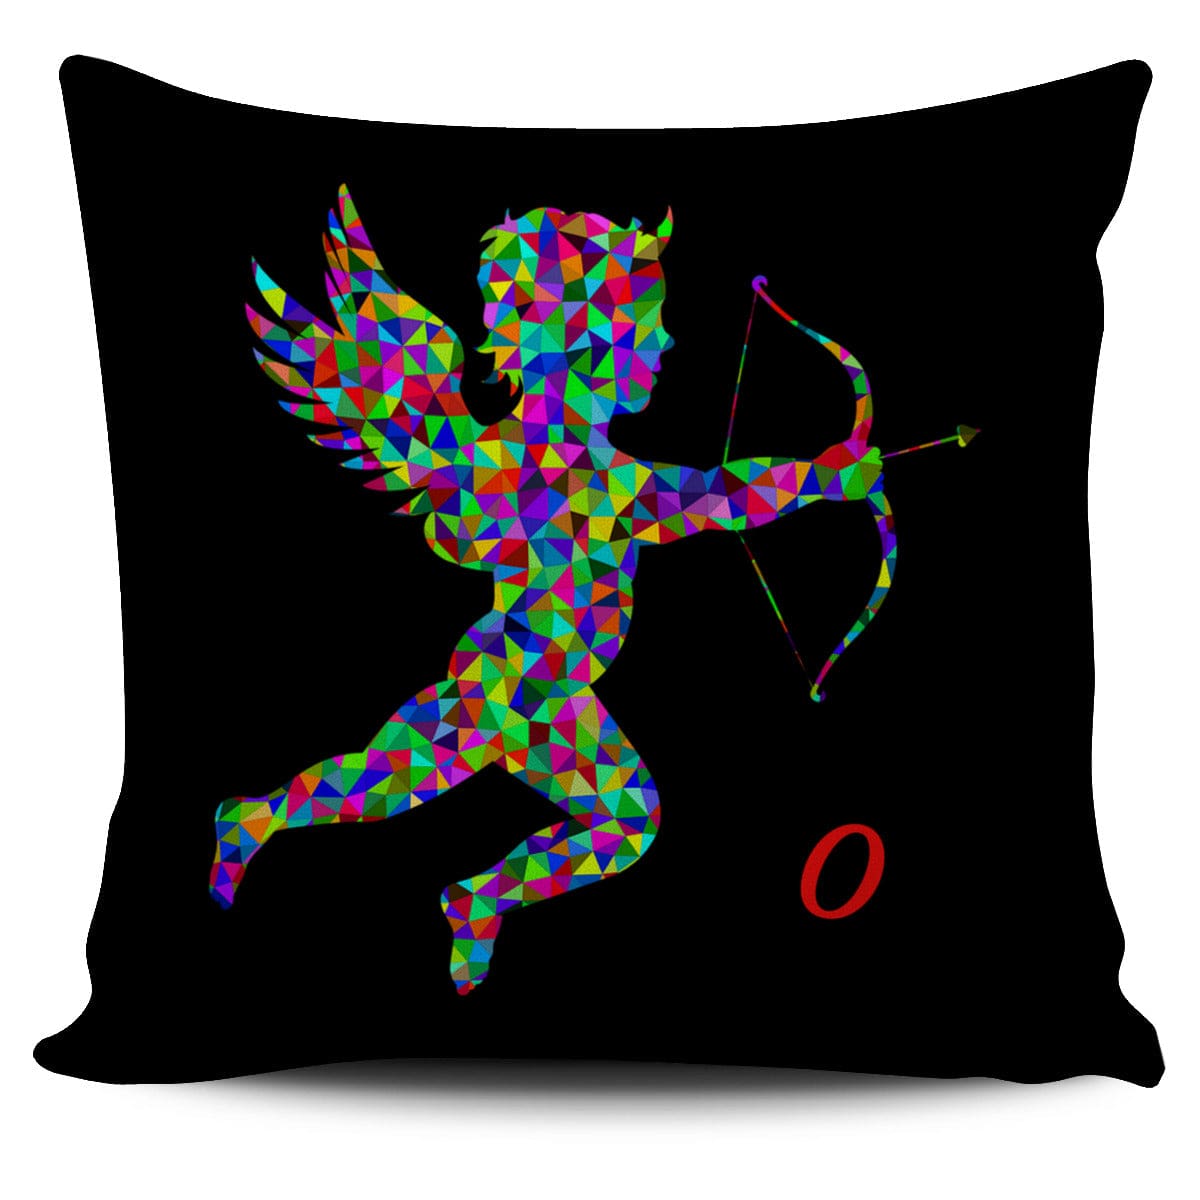 Pillow Covers - Cupid Love Pillow Set of Four